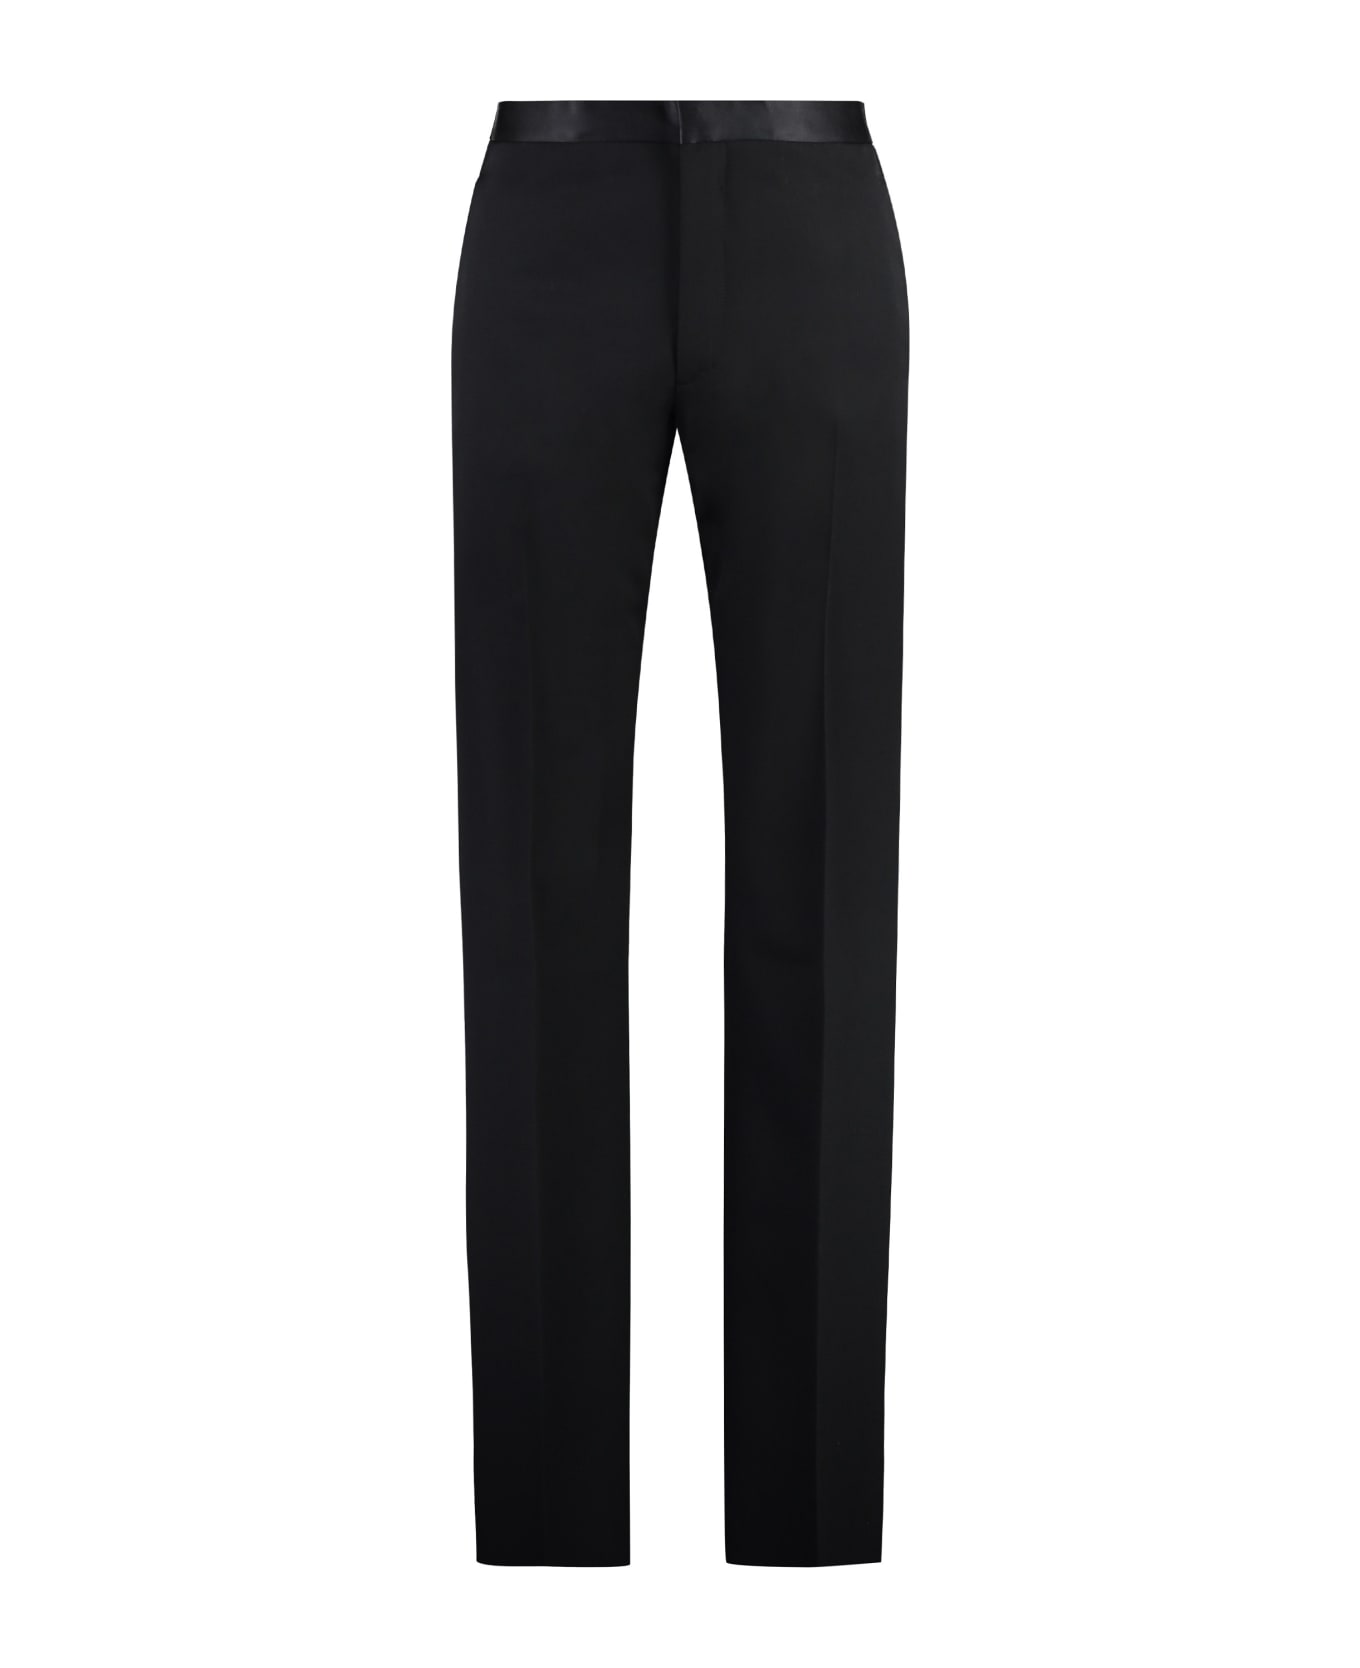 Givenchy Tailored Wool Trousers - black ボトムス